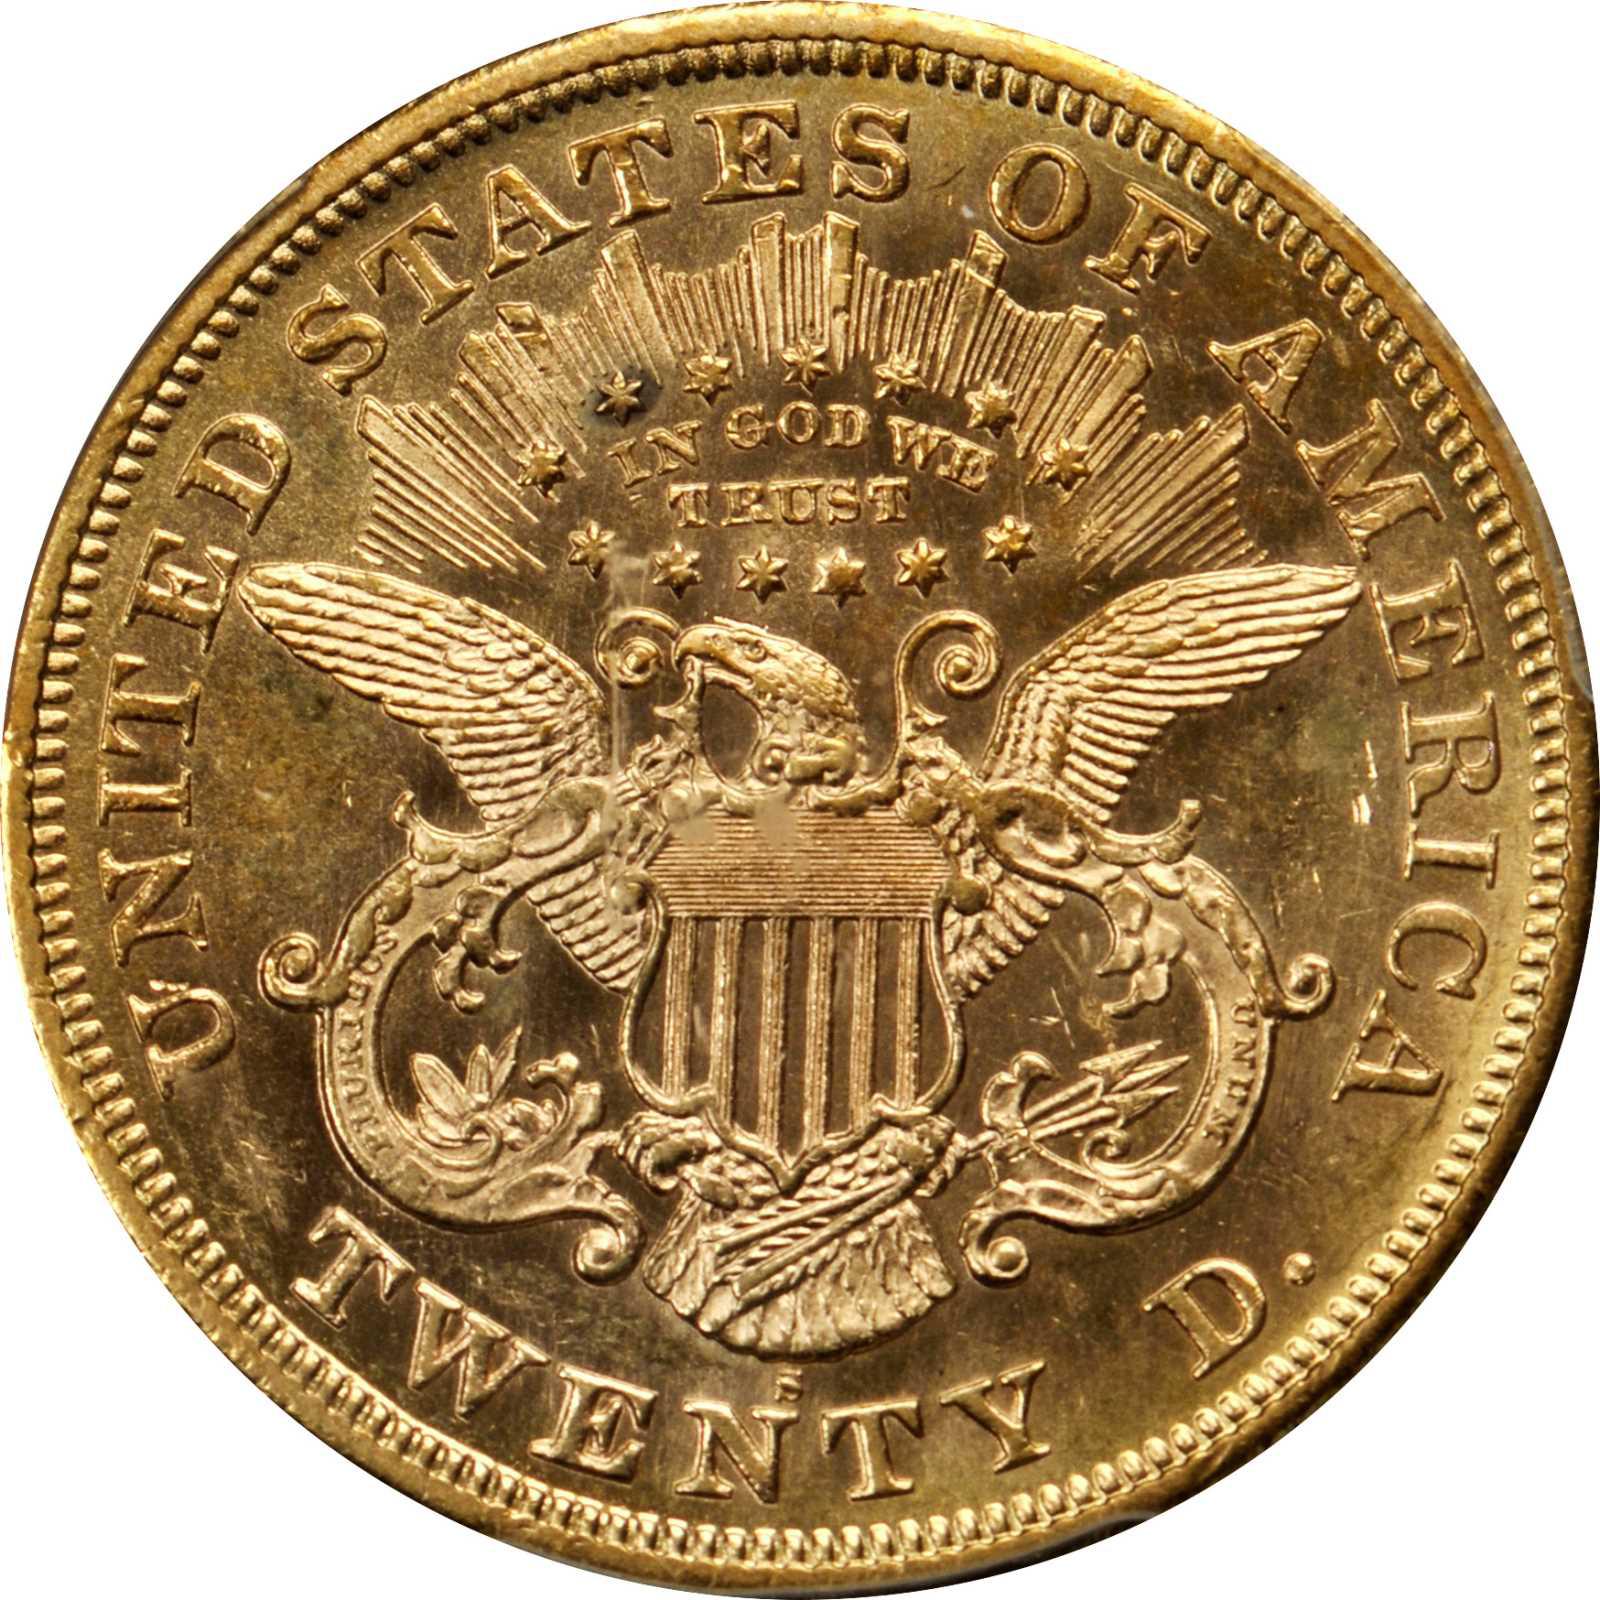 Value of 1870-S $20 Liberty Double Eagle | Sell Rare Coins